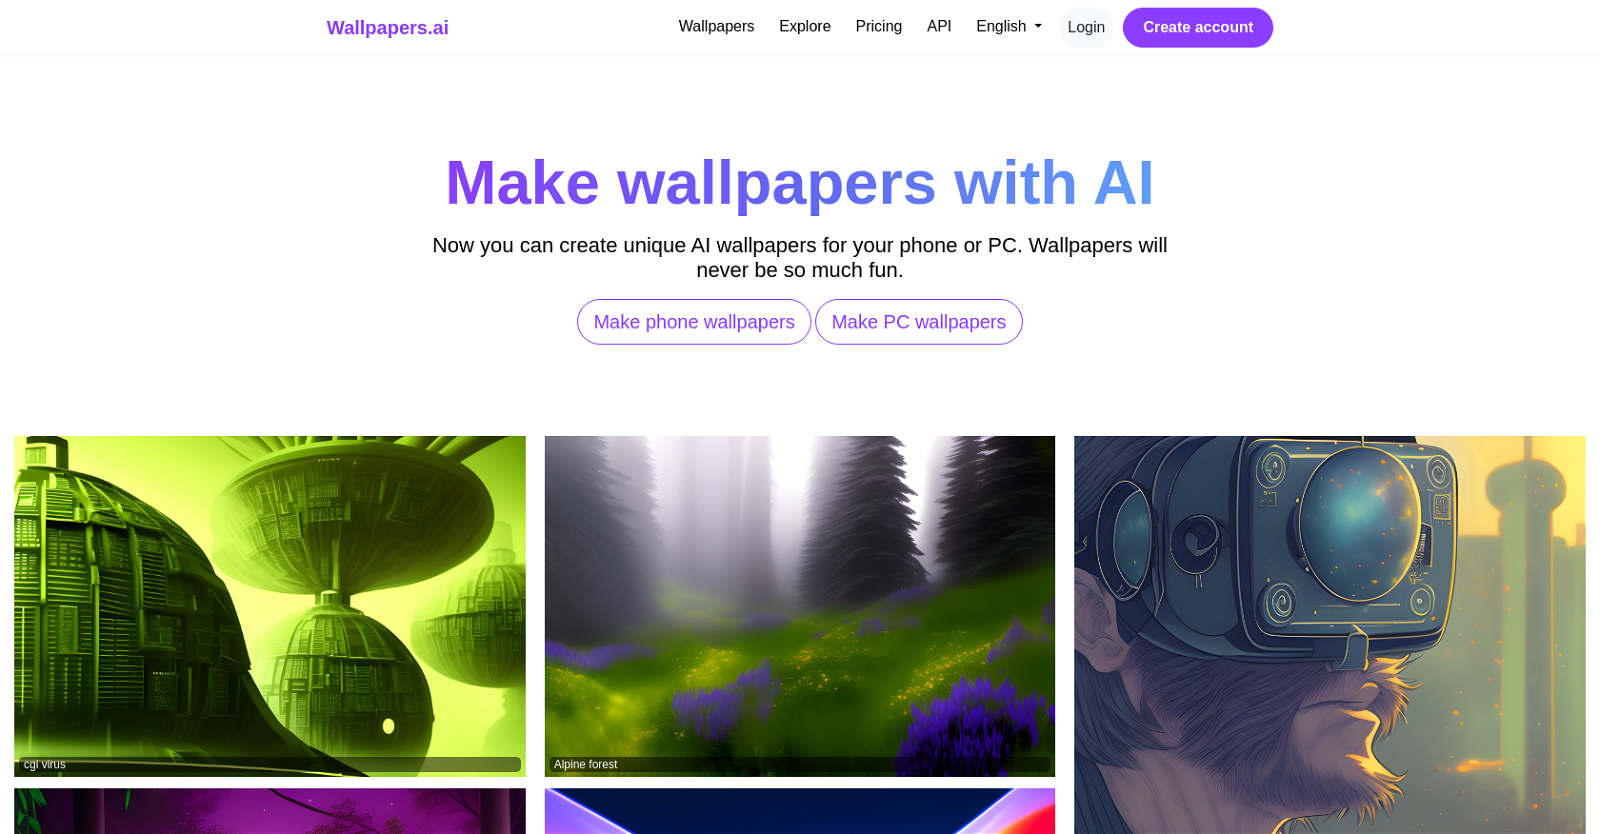 Wallpapers AI website